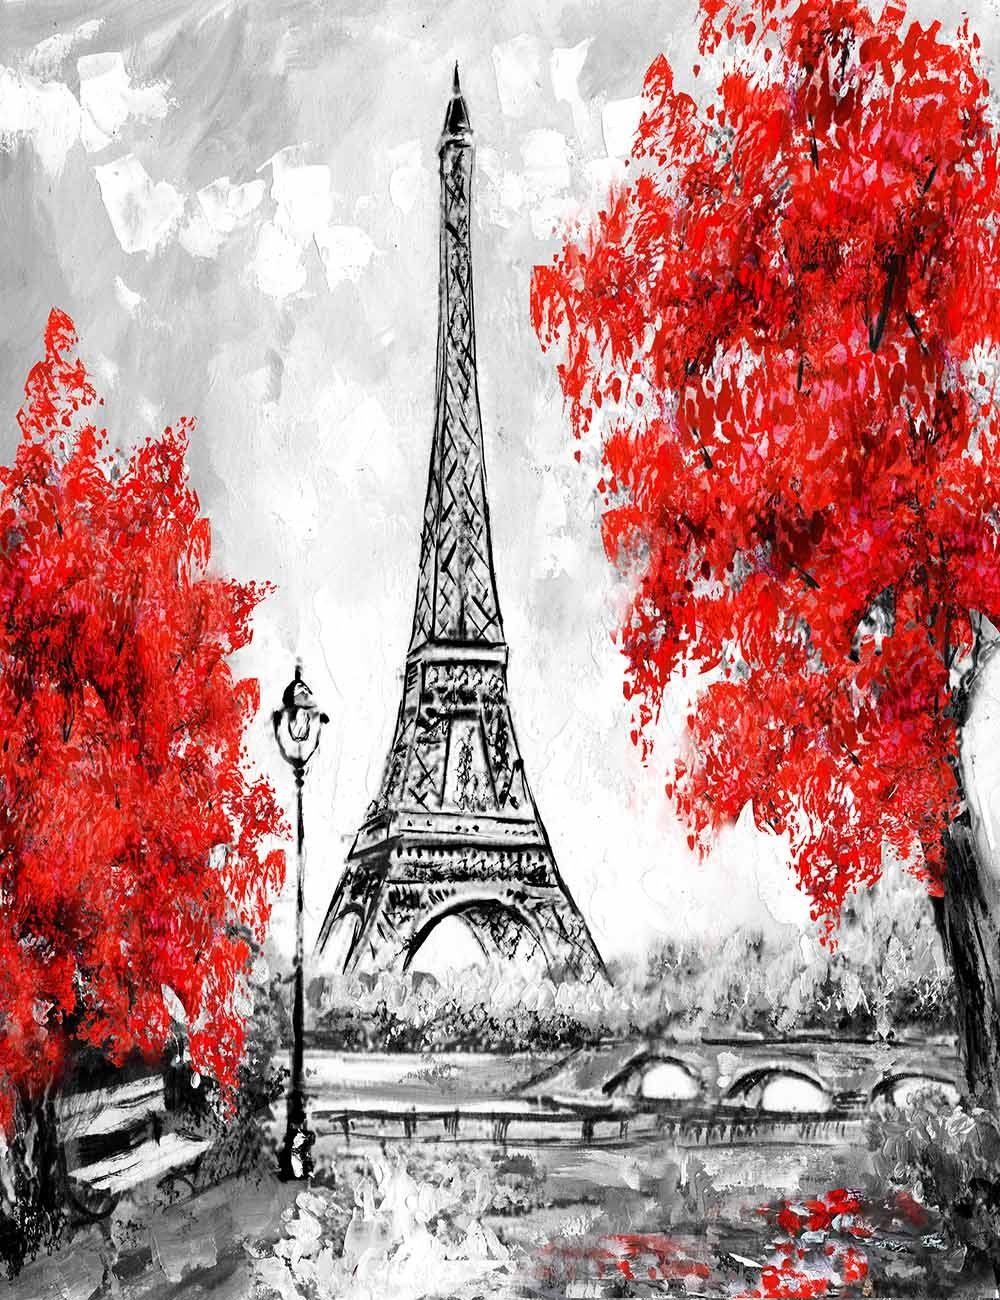 Hand Painted Pairs Tower With Red Maple Photography Backdrop J-0666 Shopbackdrop